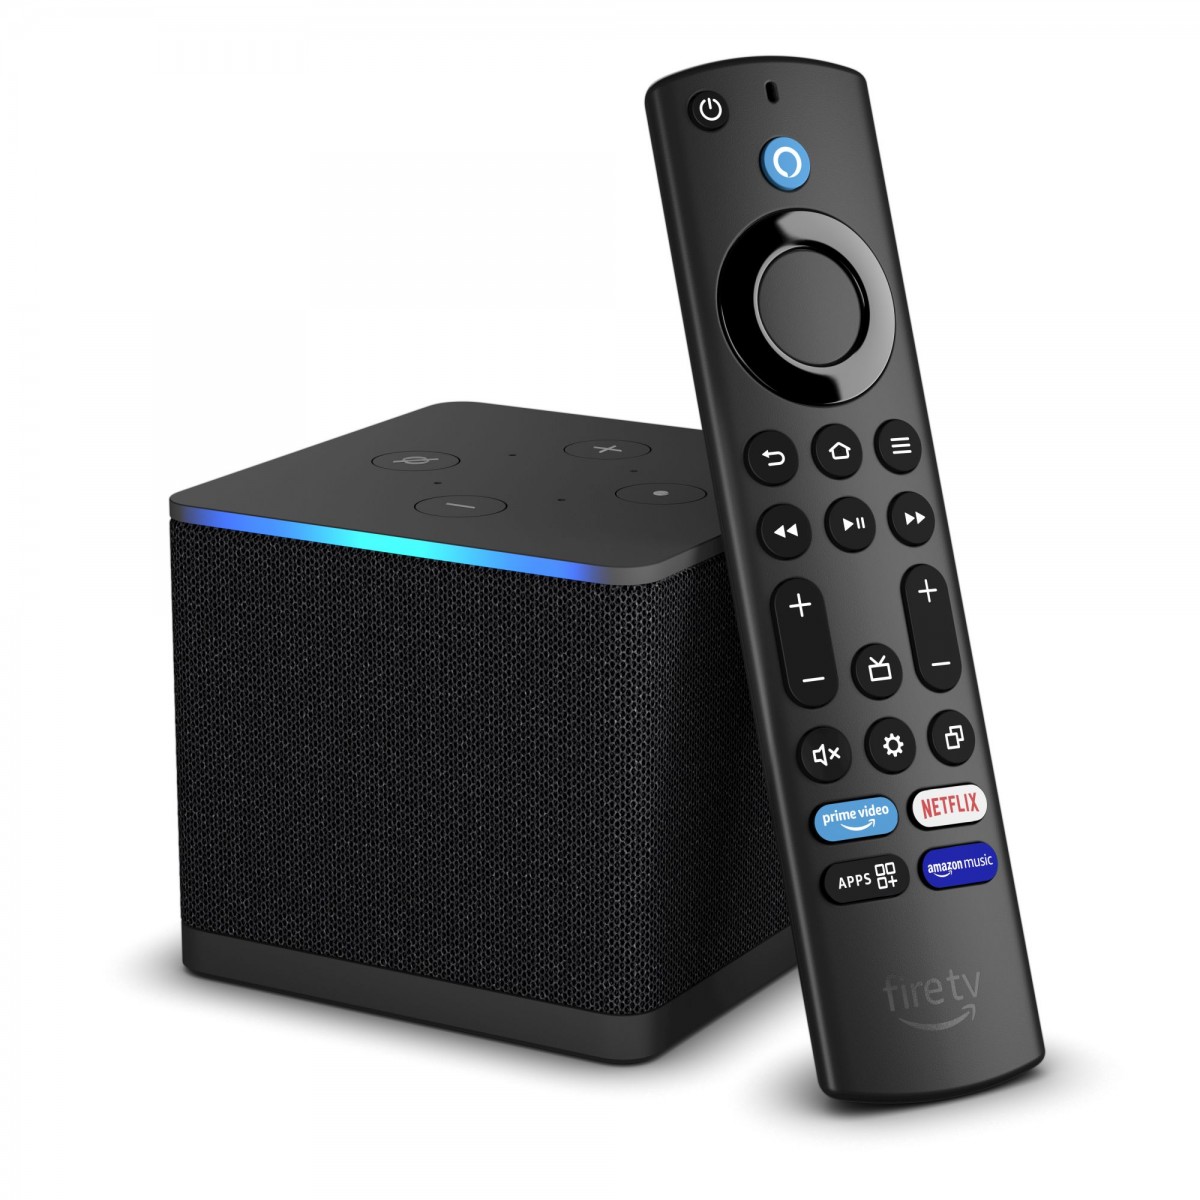 Amazon Fire TV Cube, Hands-free streaming device with Alexa